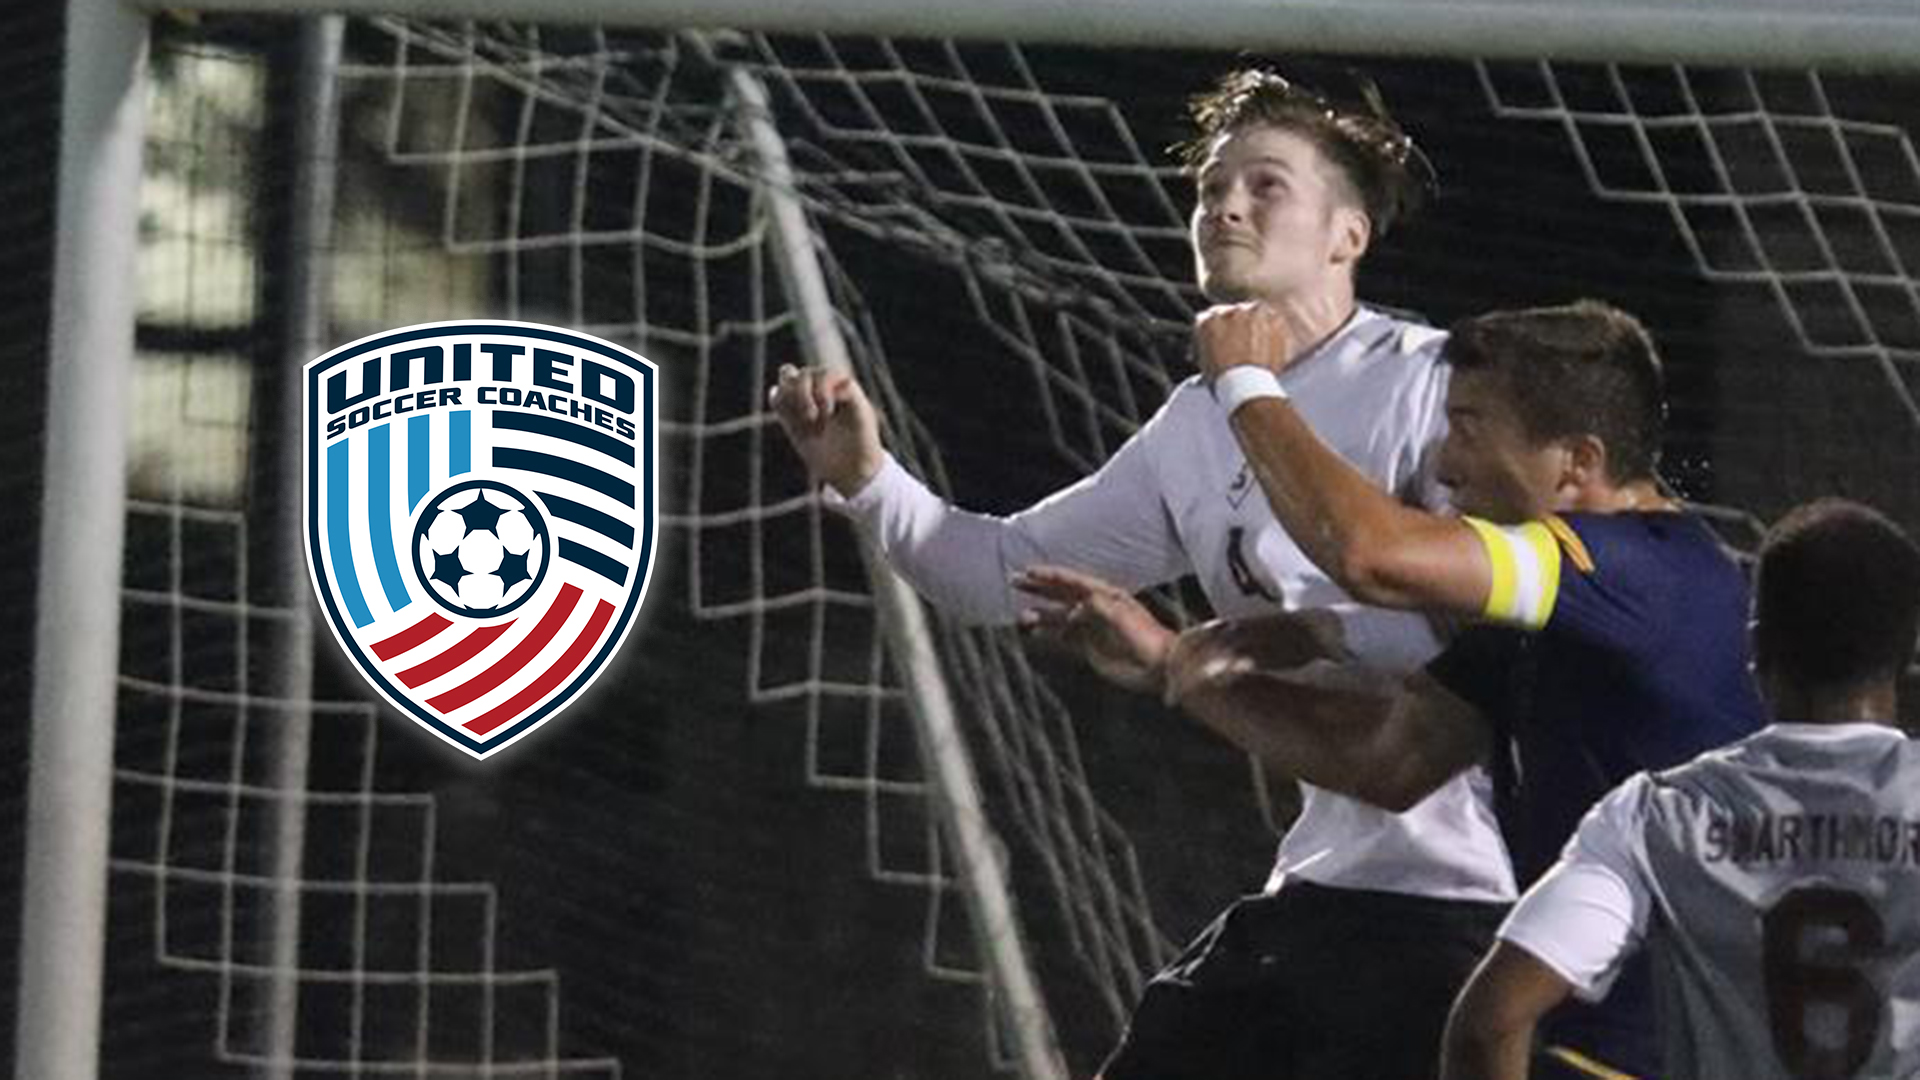 Swarthmore's Nevins Earns United Soccer Coaches All-America